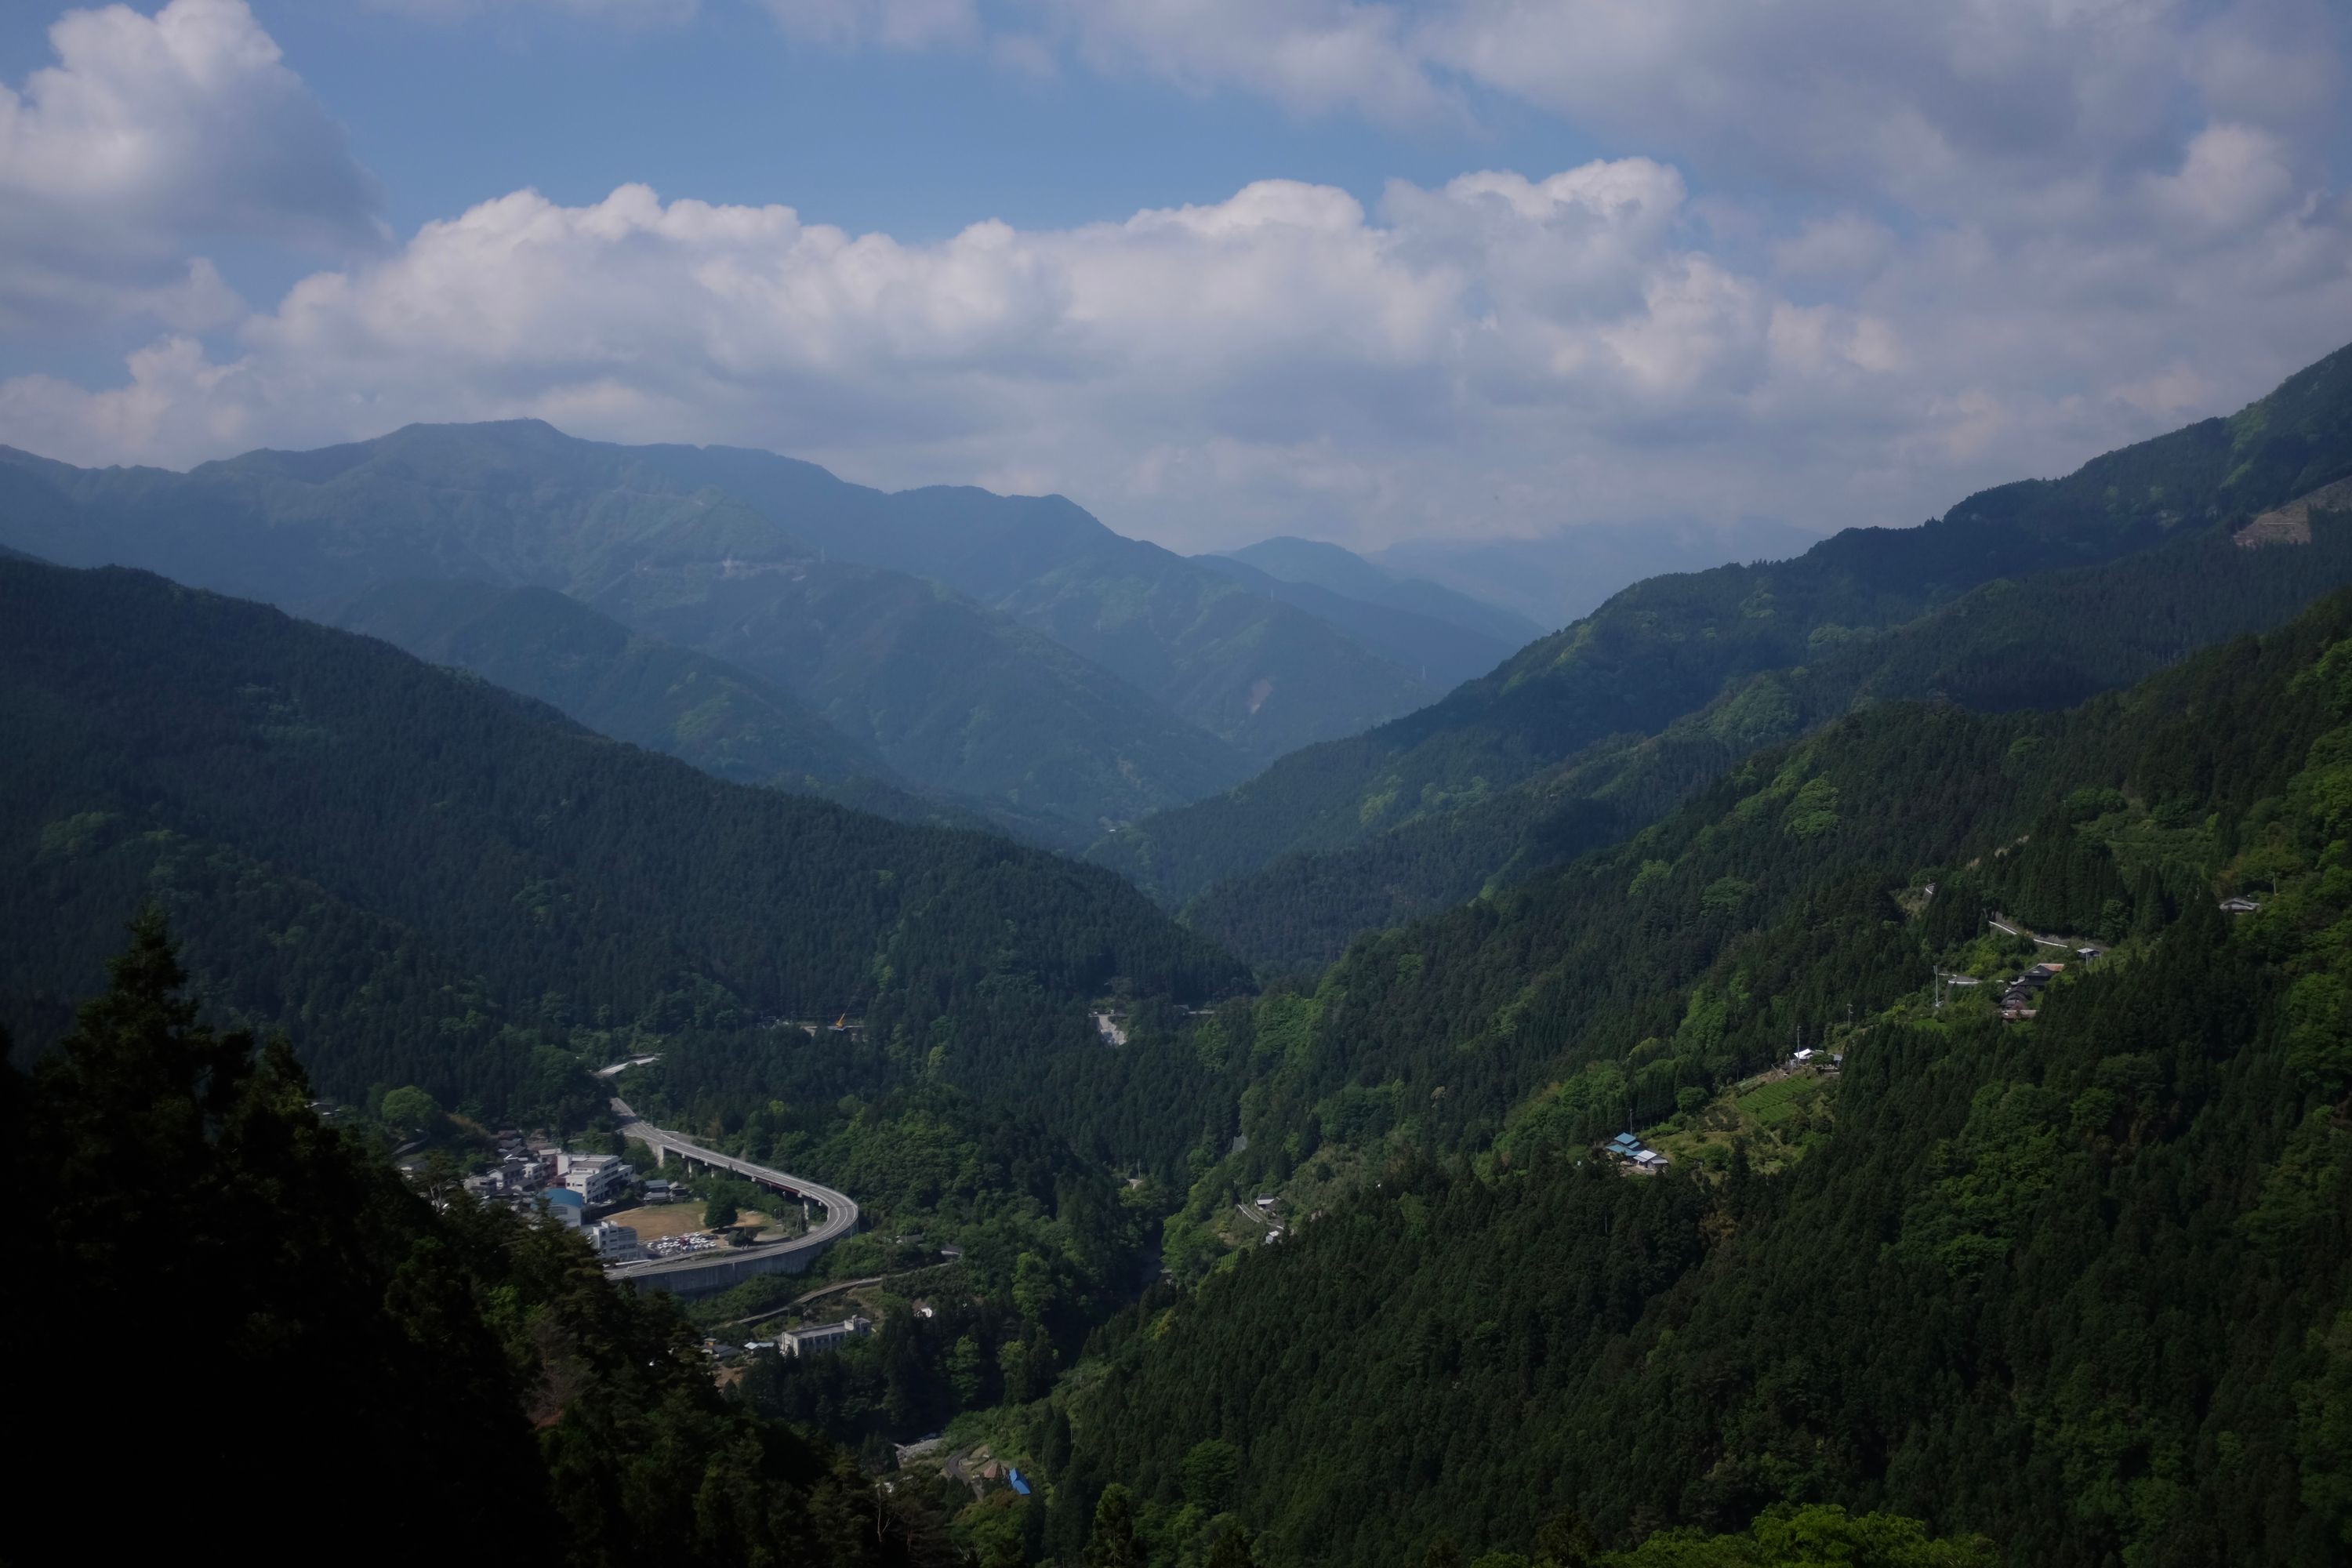 Panorama of a valley flanked on both sides by forested hillsides, with a road visible in the bottom left.